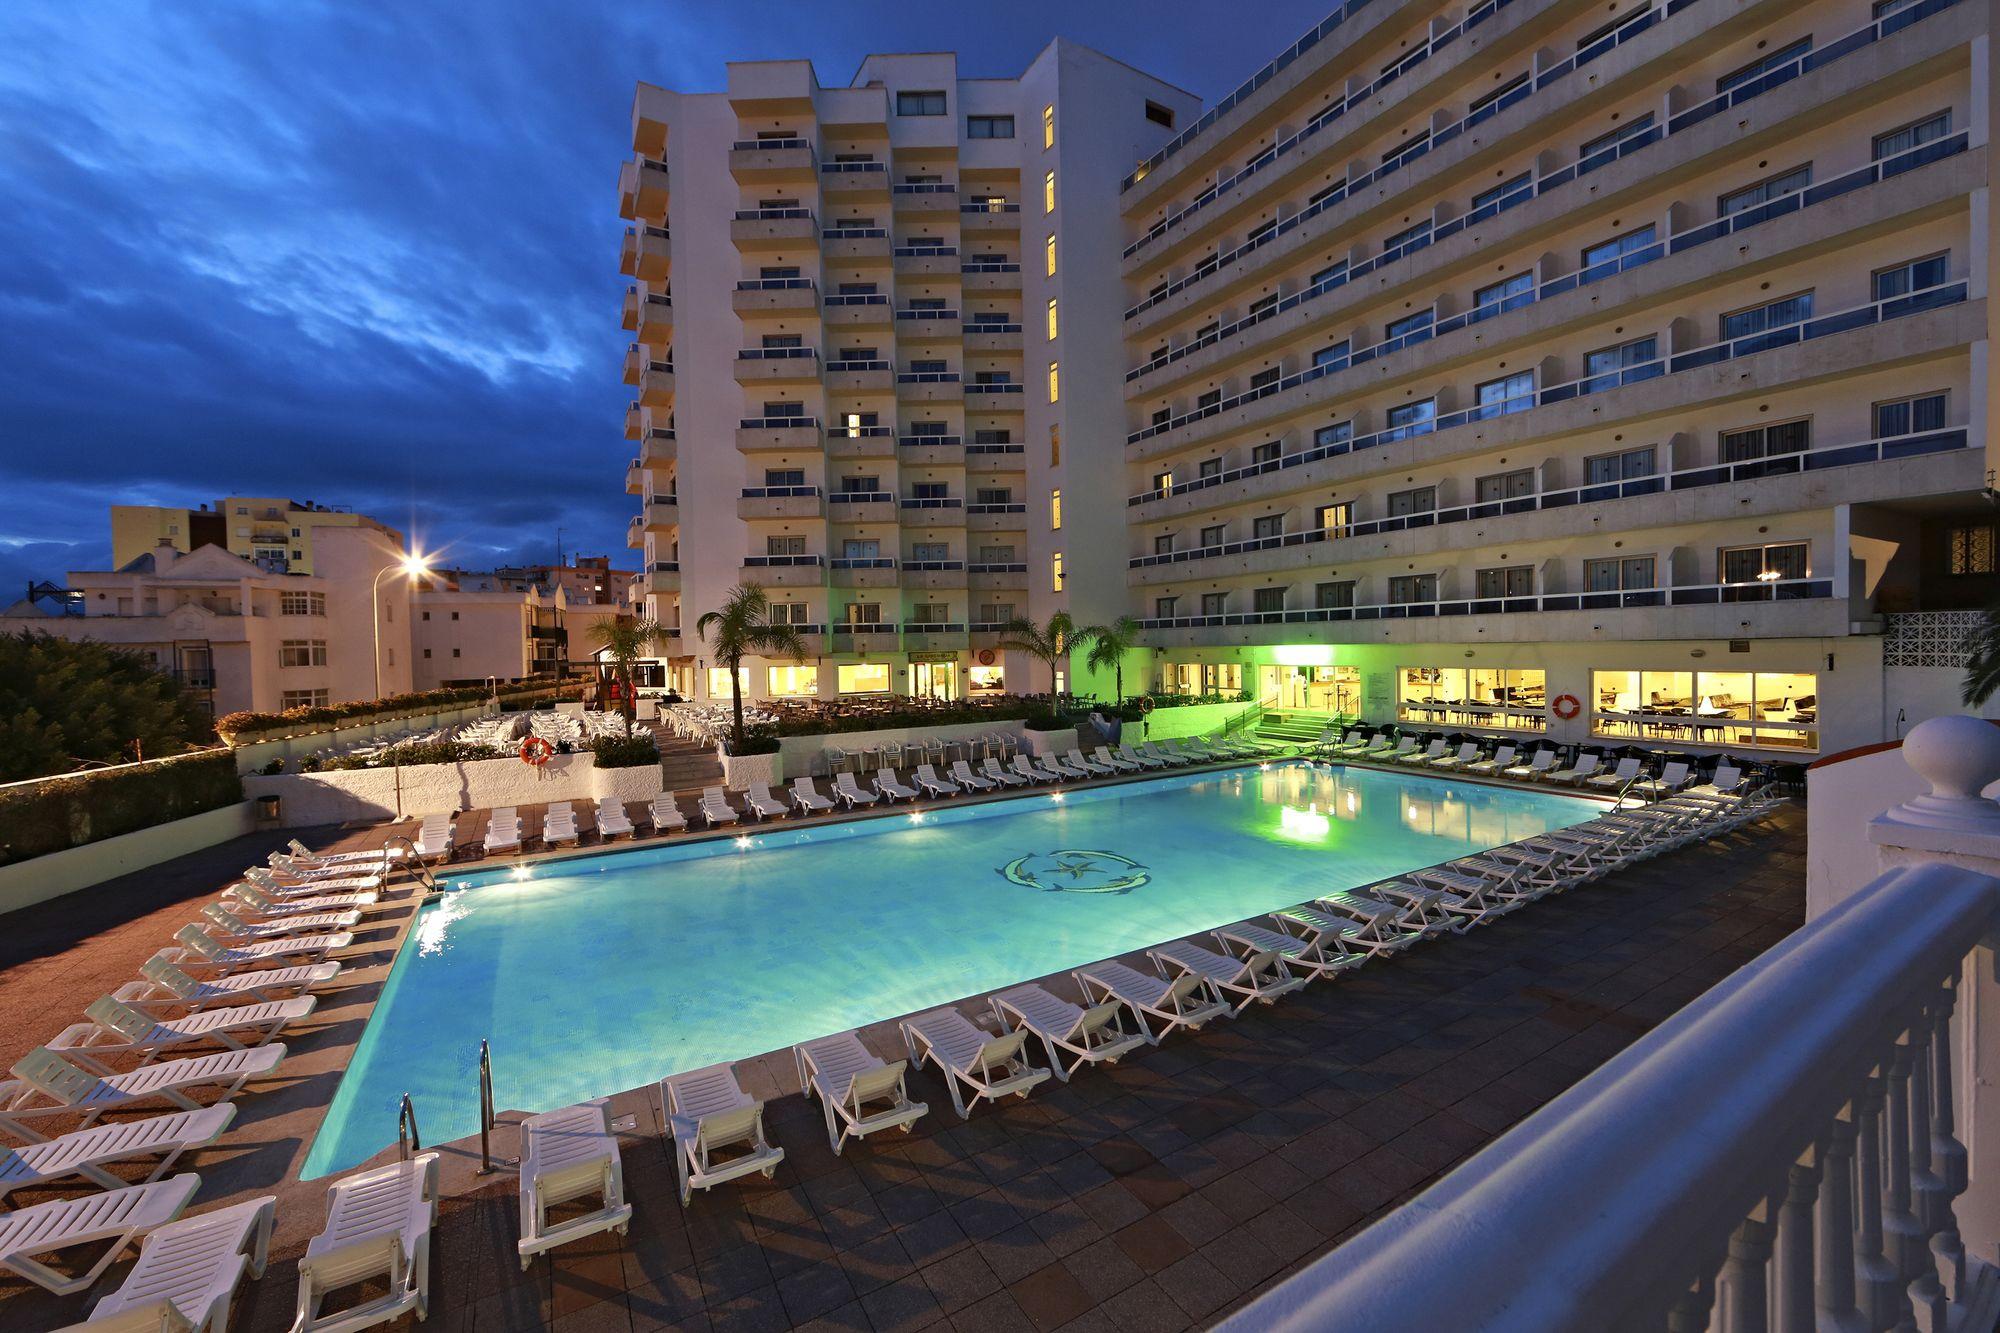 View Marconfort Griego Hotel's picturesque main pool situated in sensational Costa Del Sol.